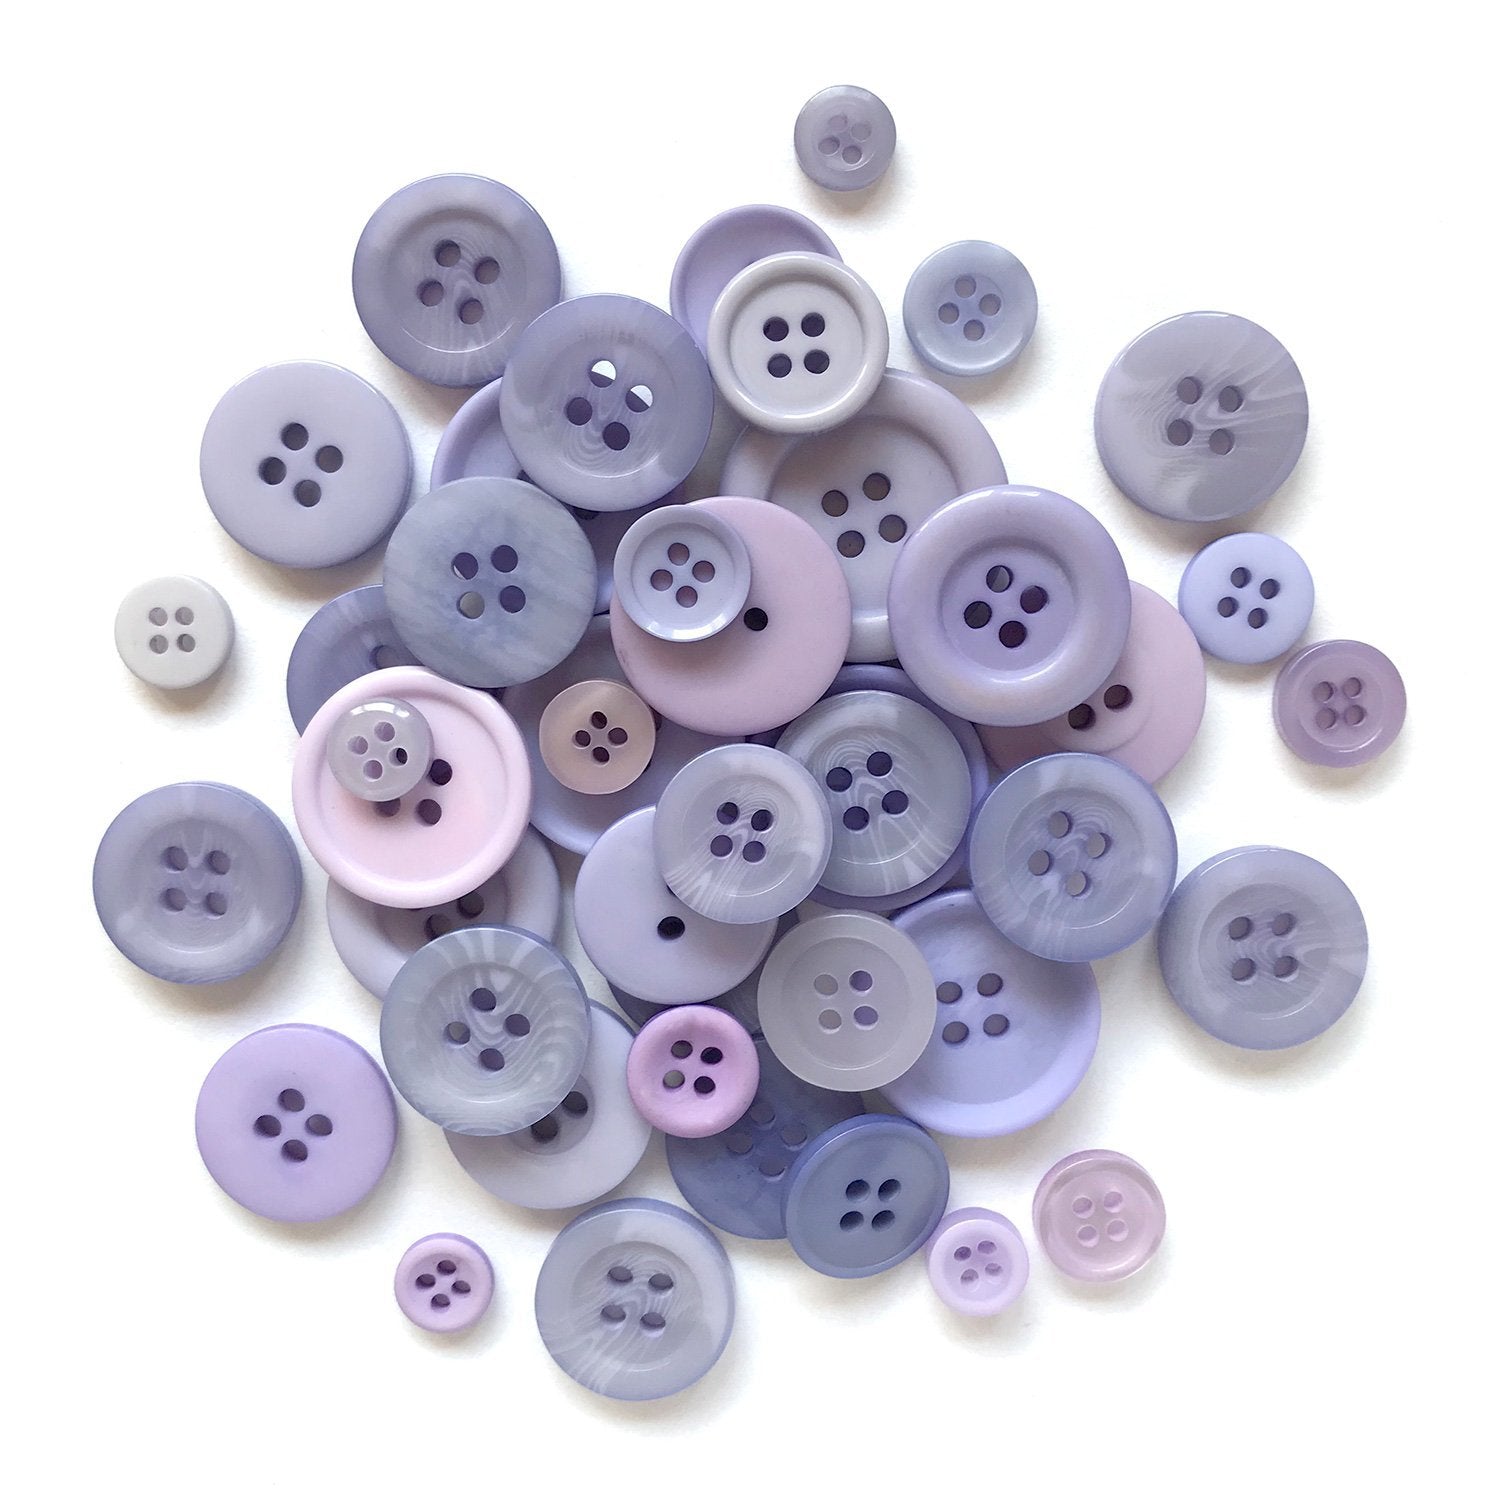 Tan Bulk Buttons for Sewing and Button Crafts